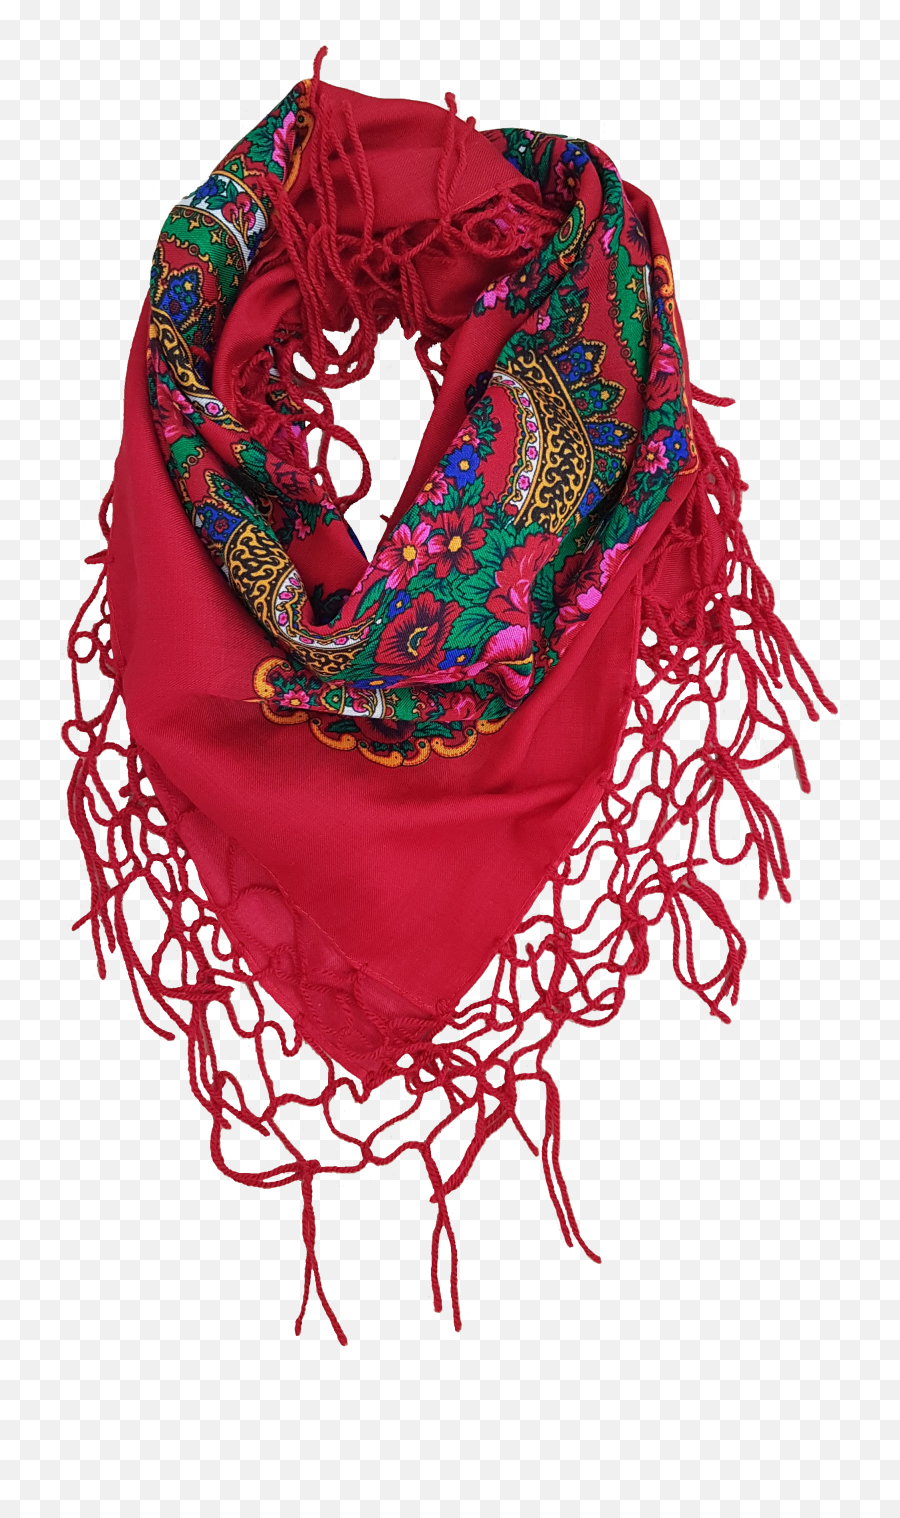 Download Red Scarf Folk - Scarf Full Size Png Image Pngkit Scarf,Scarf Png